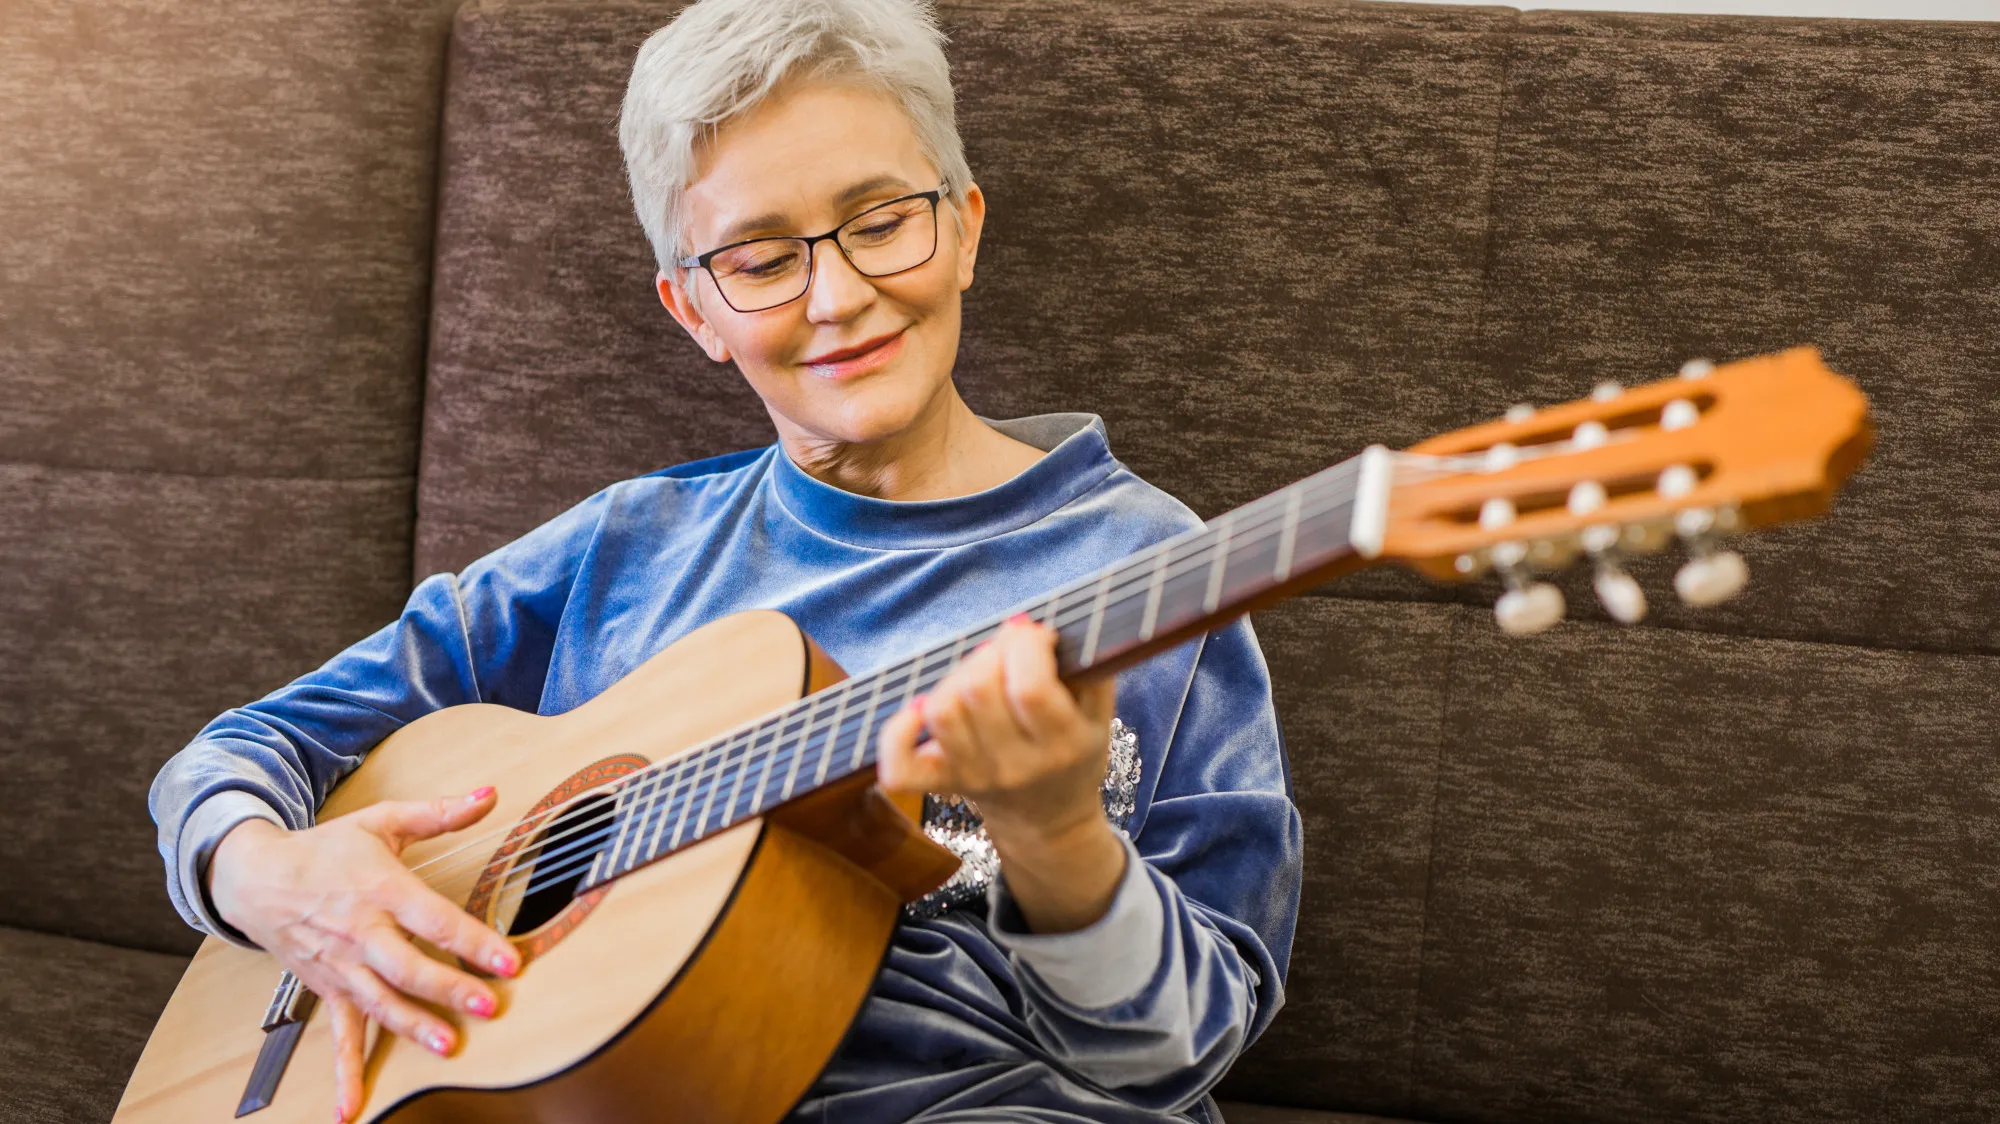 55 Hobbies for Seniors to Keep Retirement Fun and Active